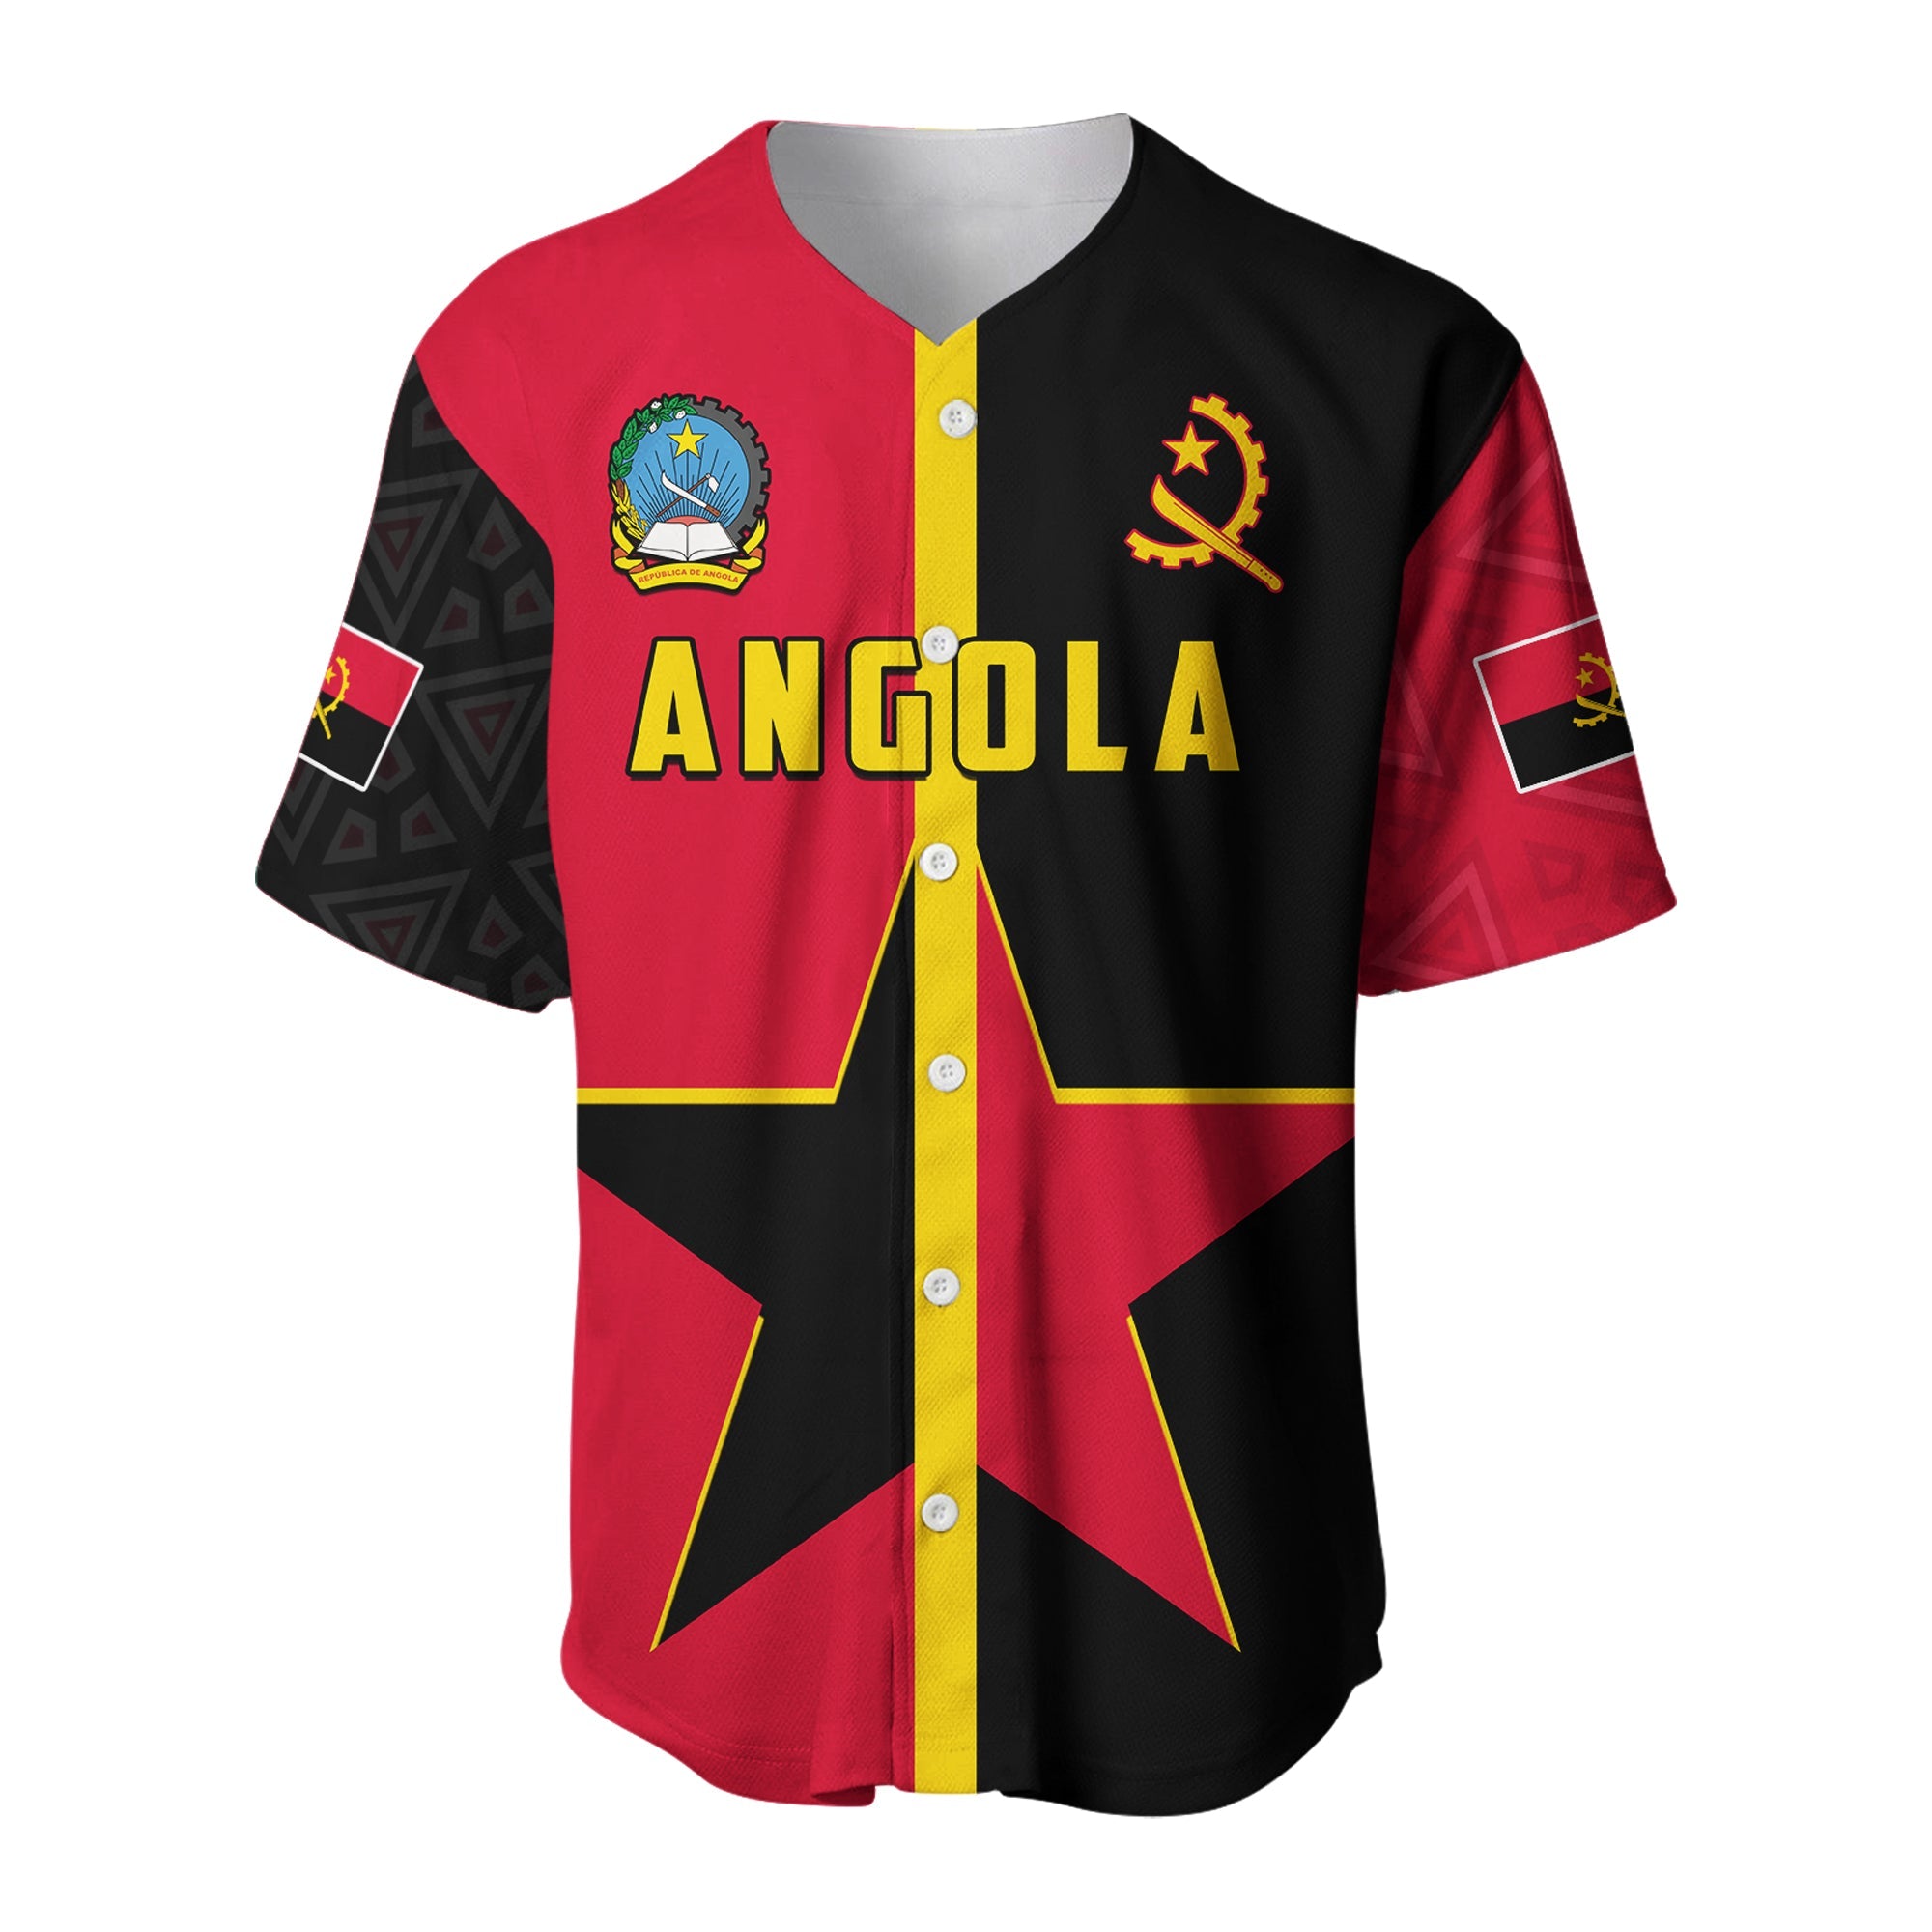 angola-baseball-jersey-star-and-flag-style-sporty